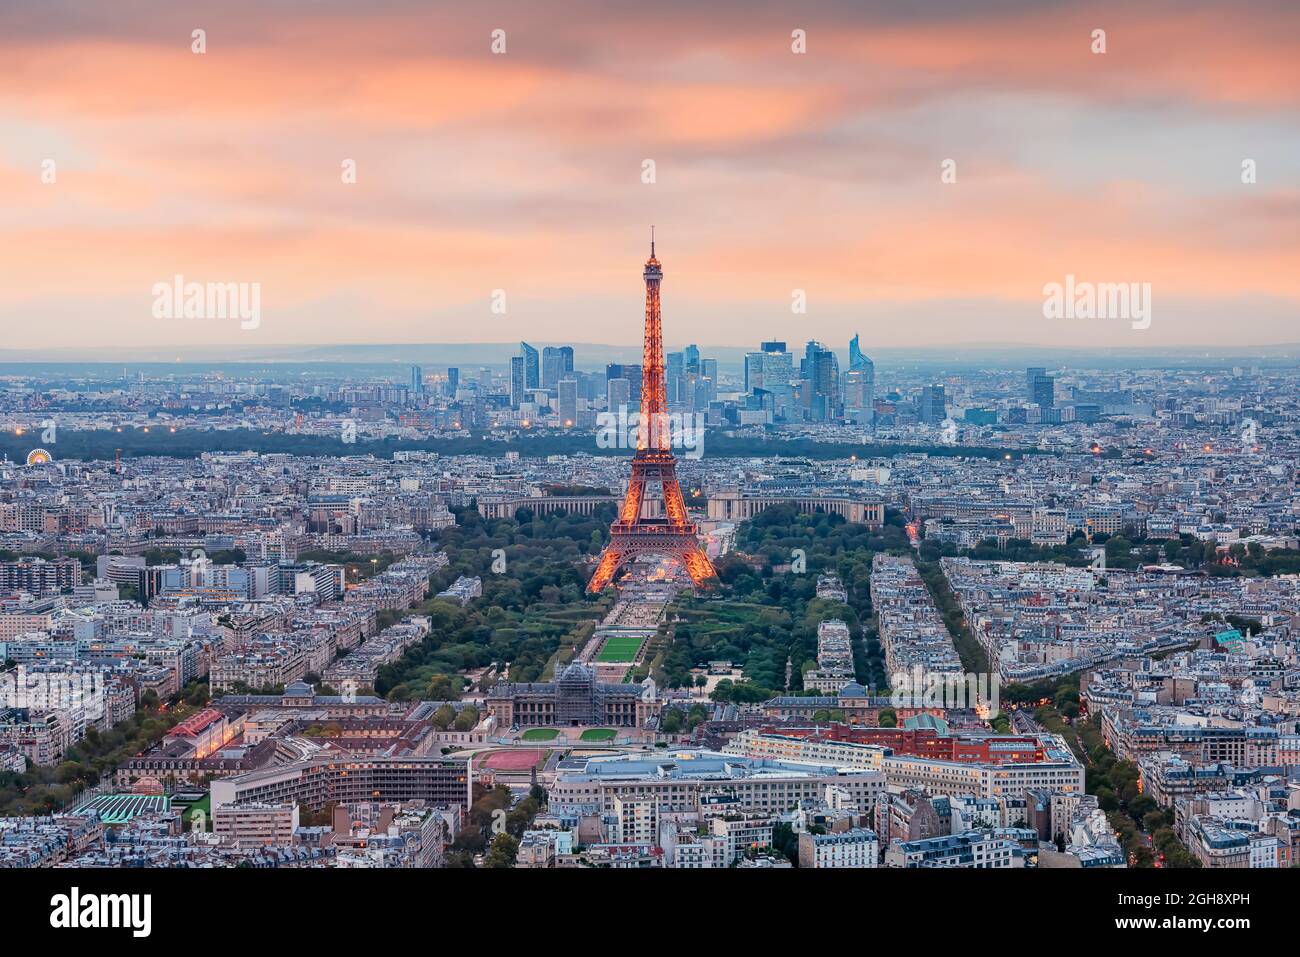 Eiffel Tower in the evening - Paris city at sunset Stock Photo